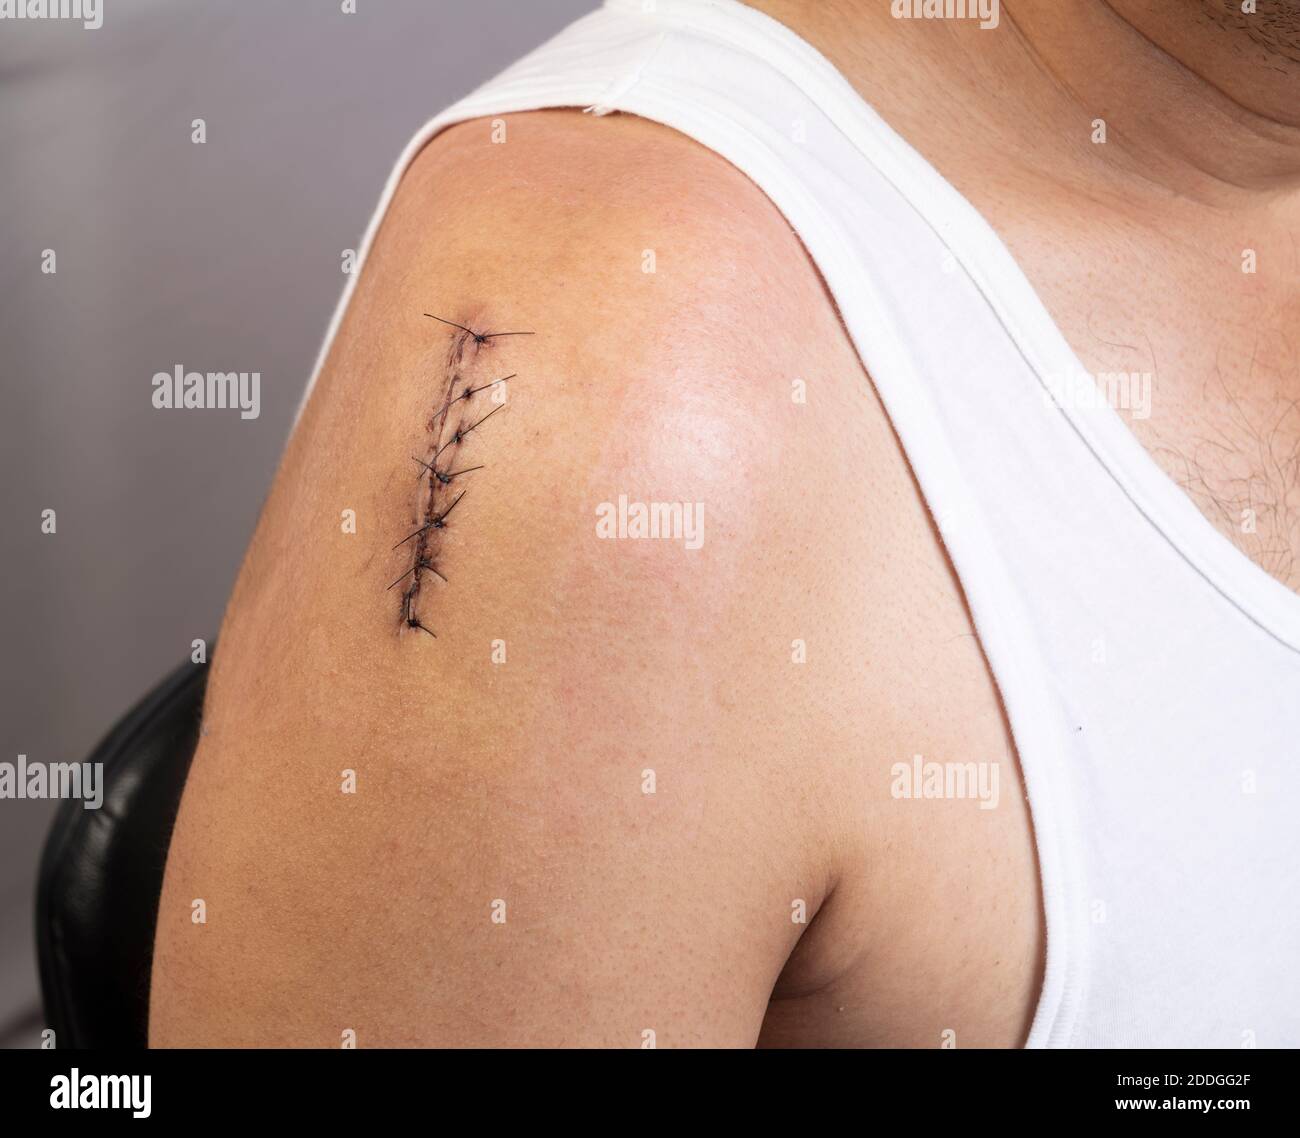 Front side closeup view of surgical incision on upper right shoulder joint closed with sutures Stock Photo